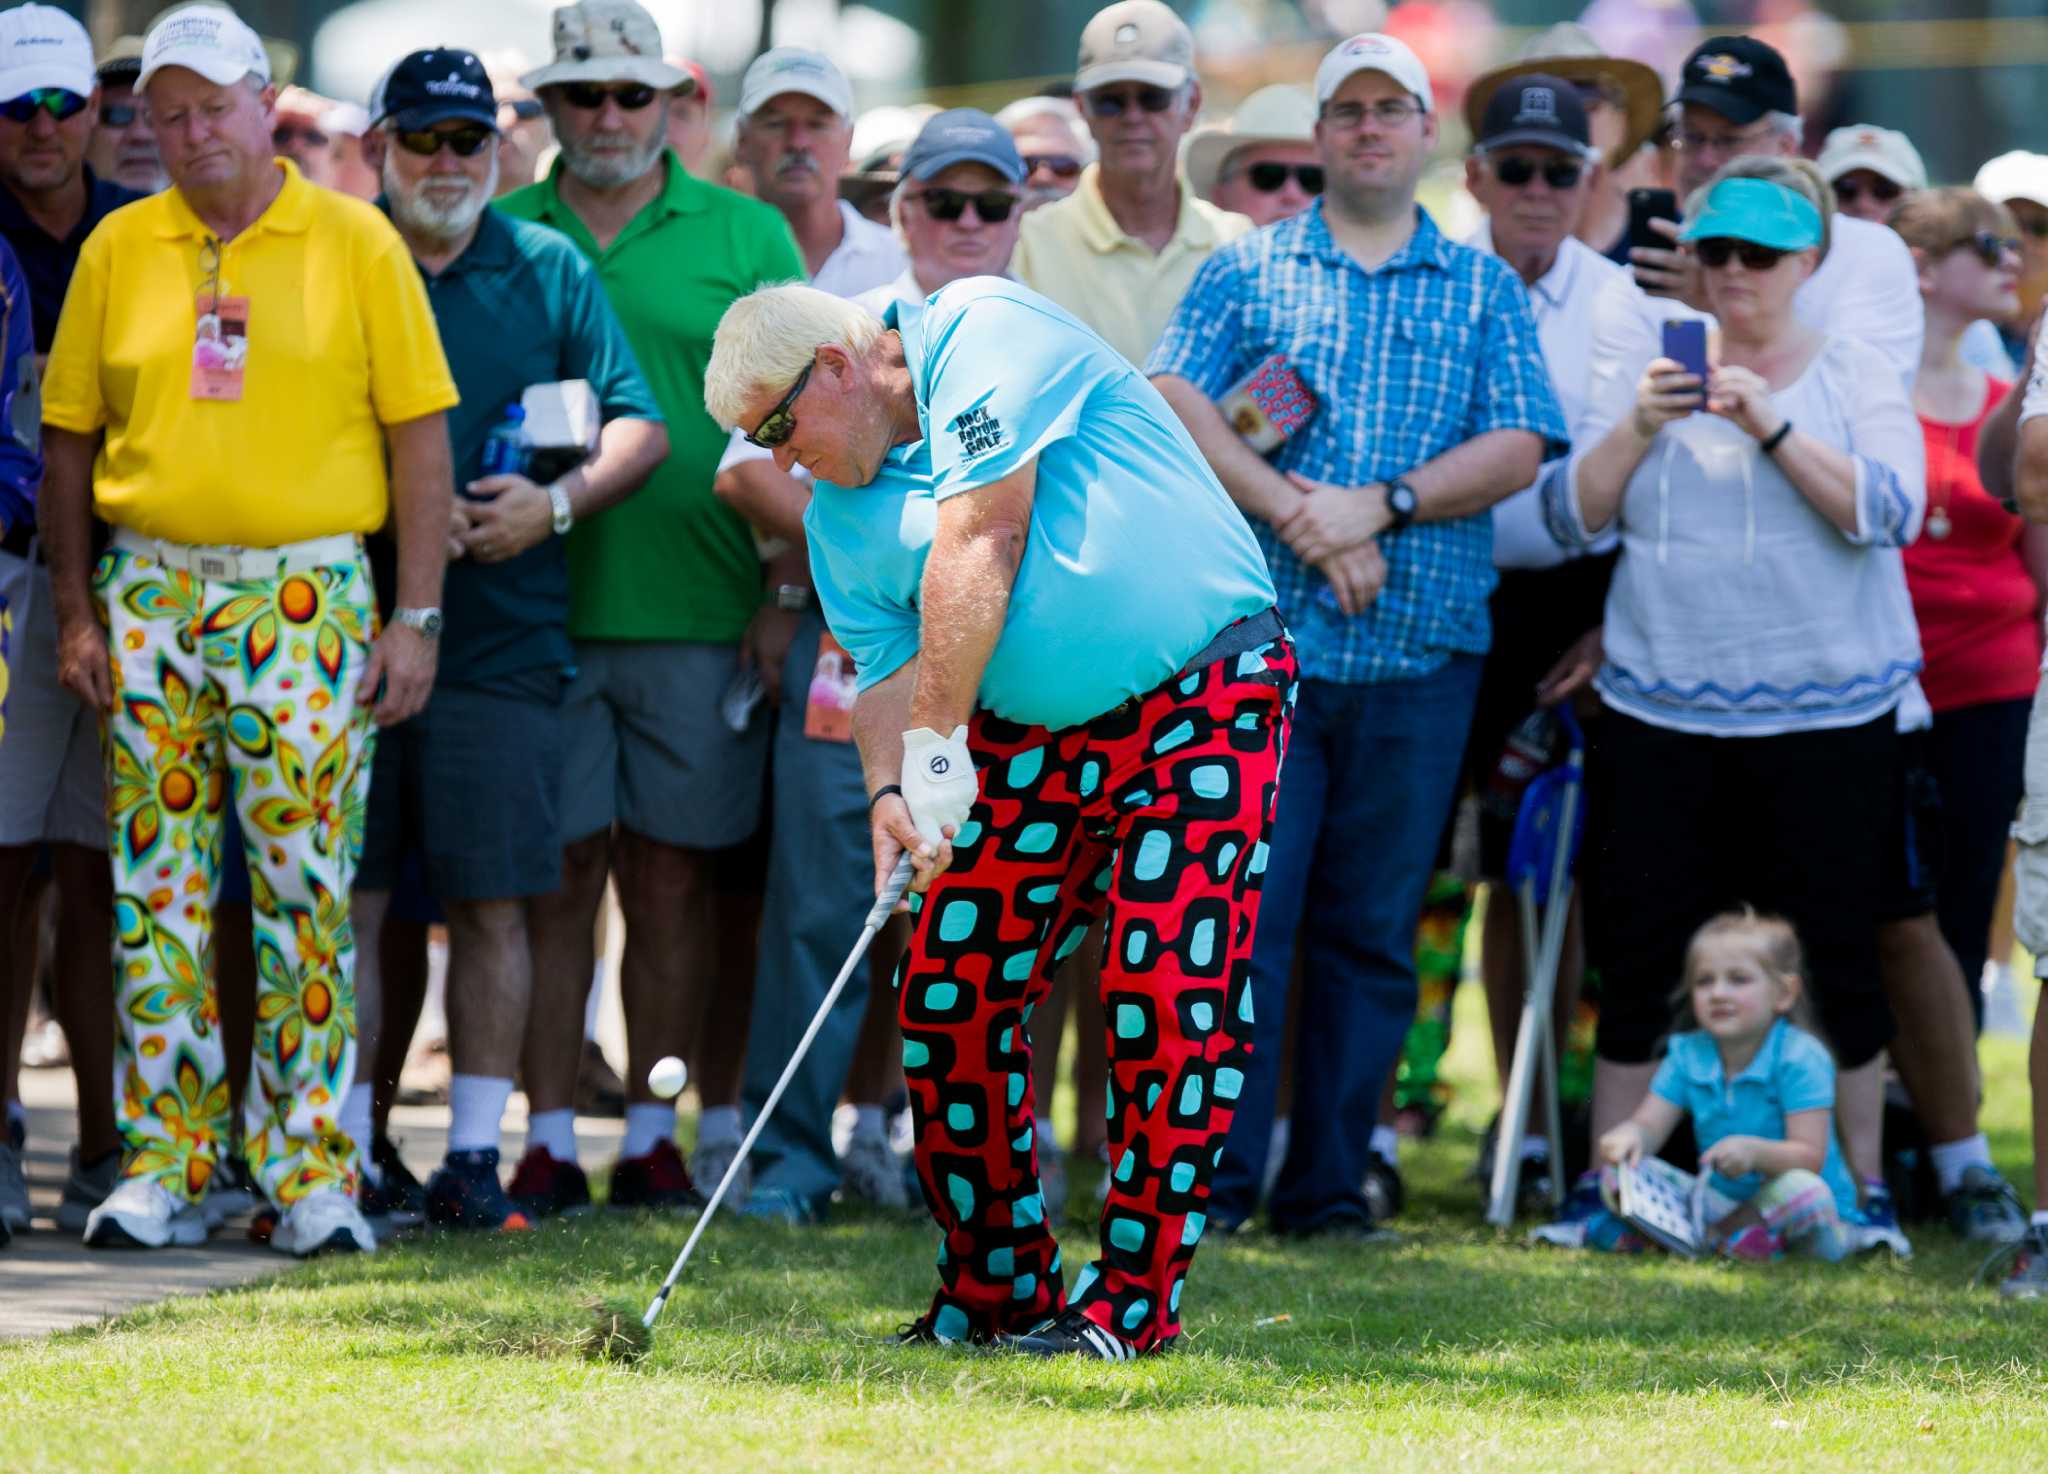 John Daly in Loudmouth's classic Shagadelic bright golf pants! #JohnDaly  #PGA #PGAGolf #LoudmouthGolf #LoudmouthNation #Bright…